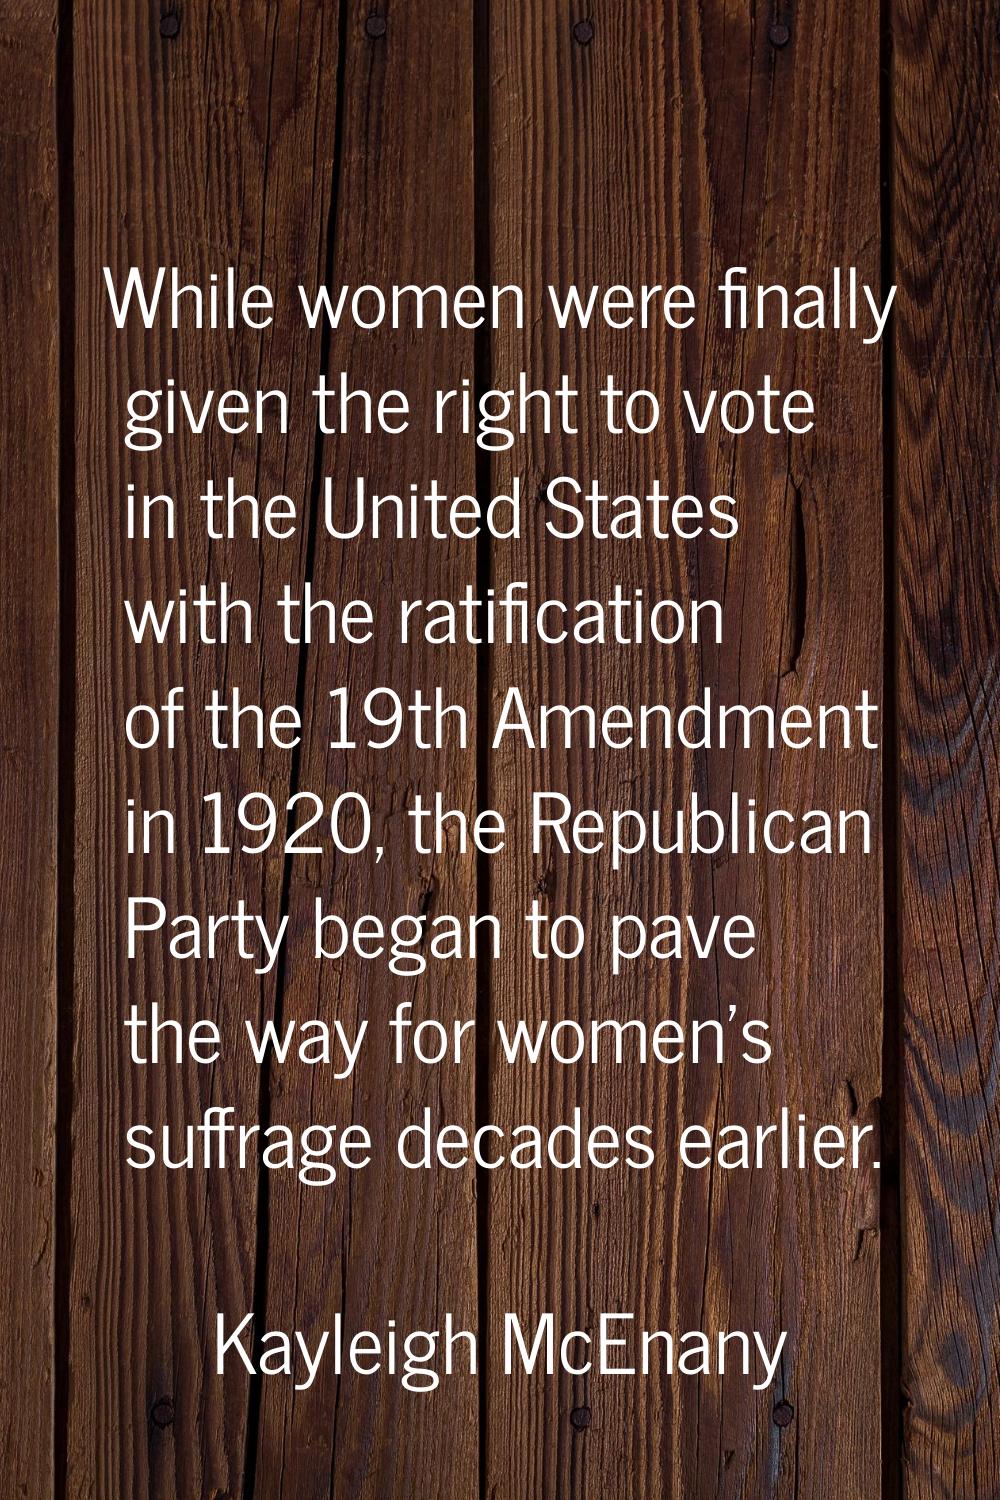 While women were finally given the right to vote in the United States with the ratification of the 